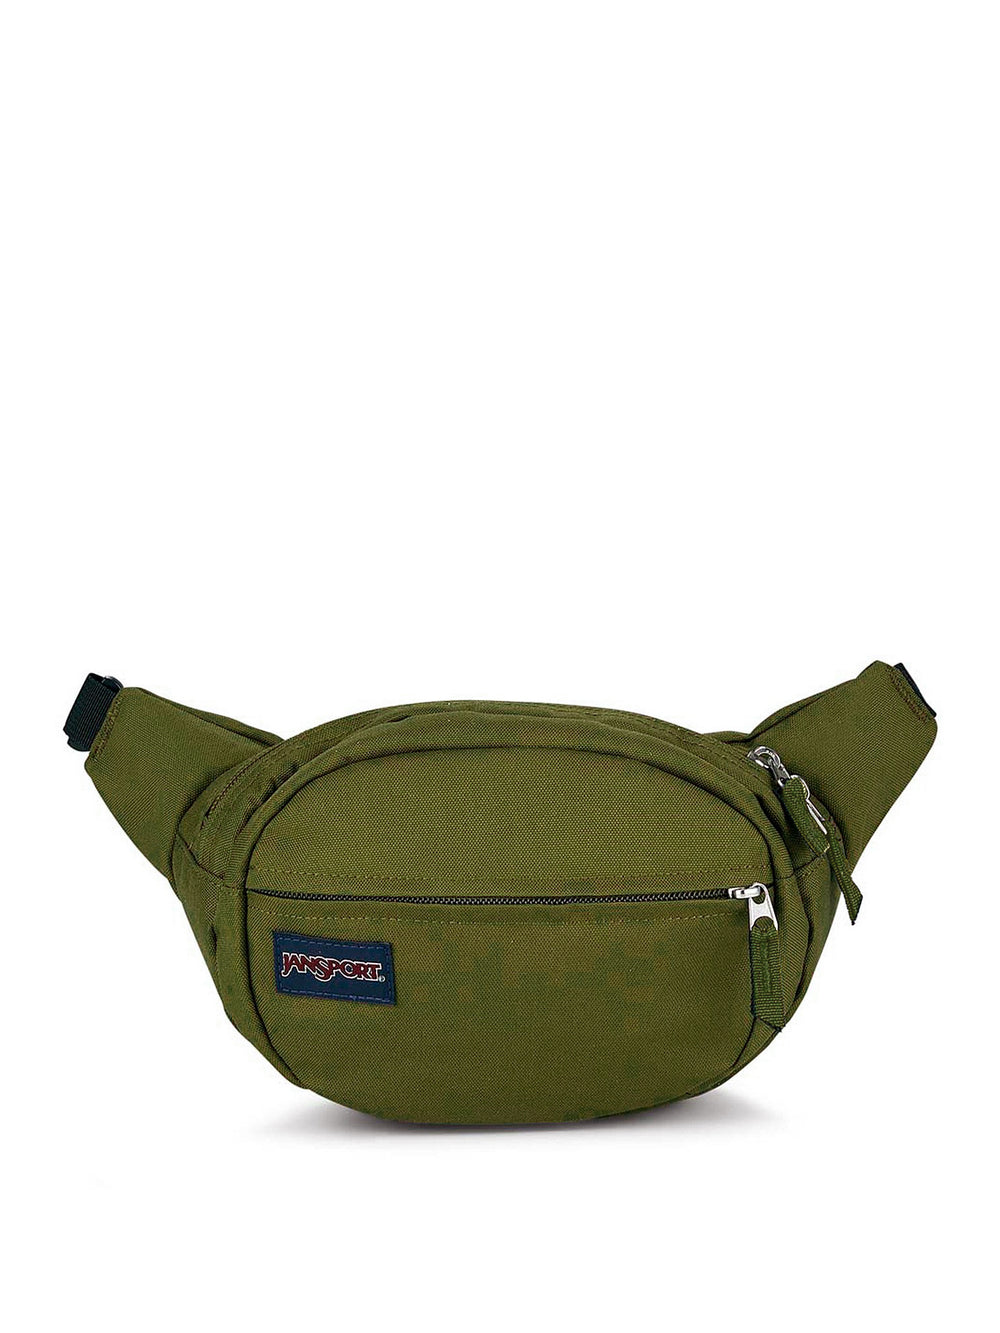 JANSPORT FIFTH AVE